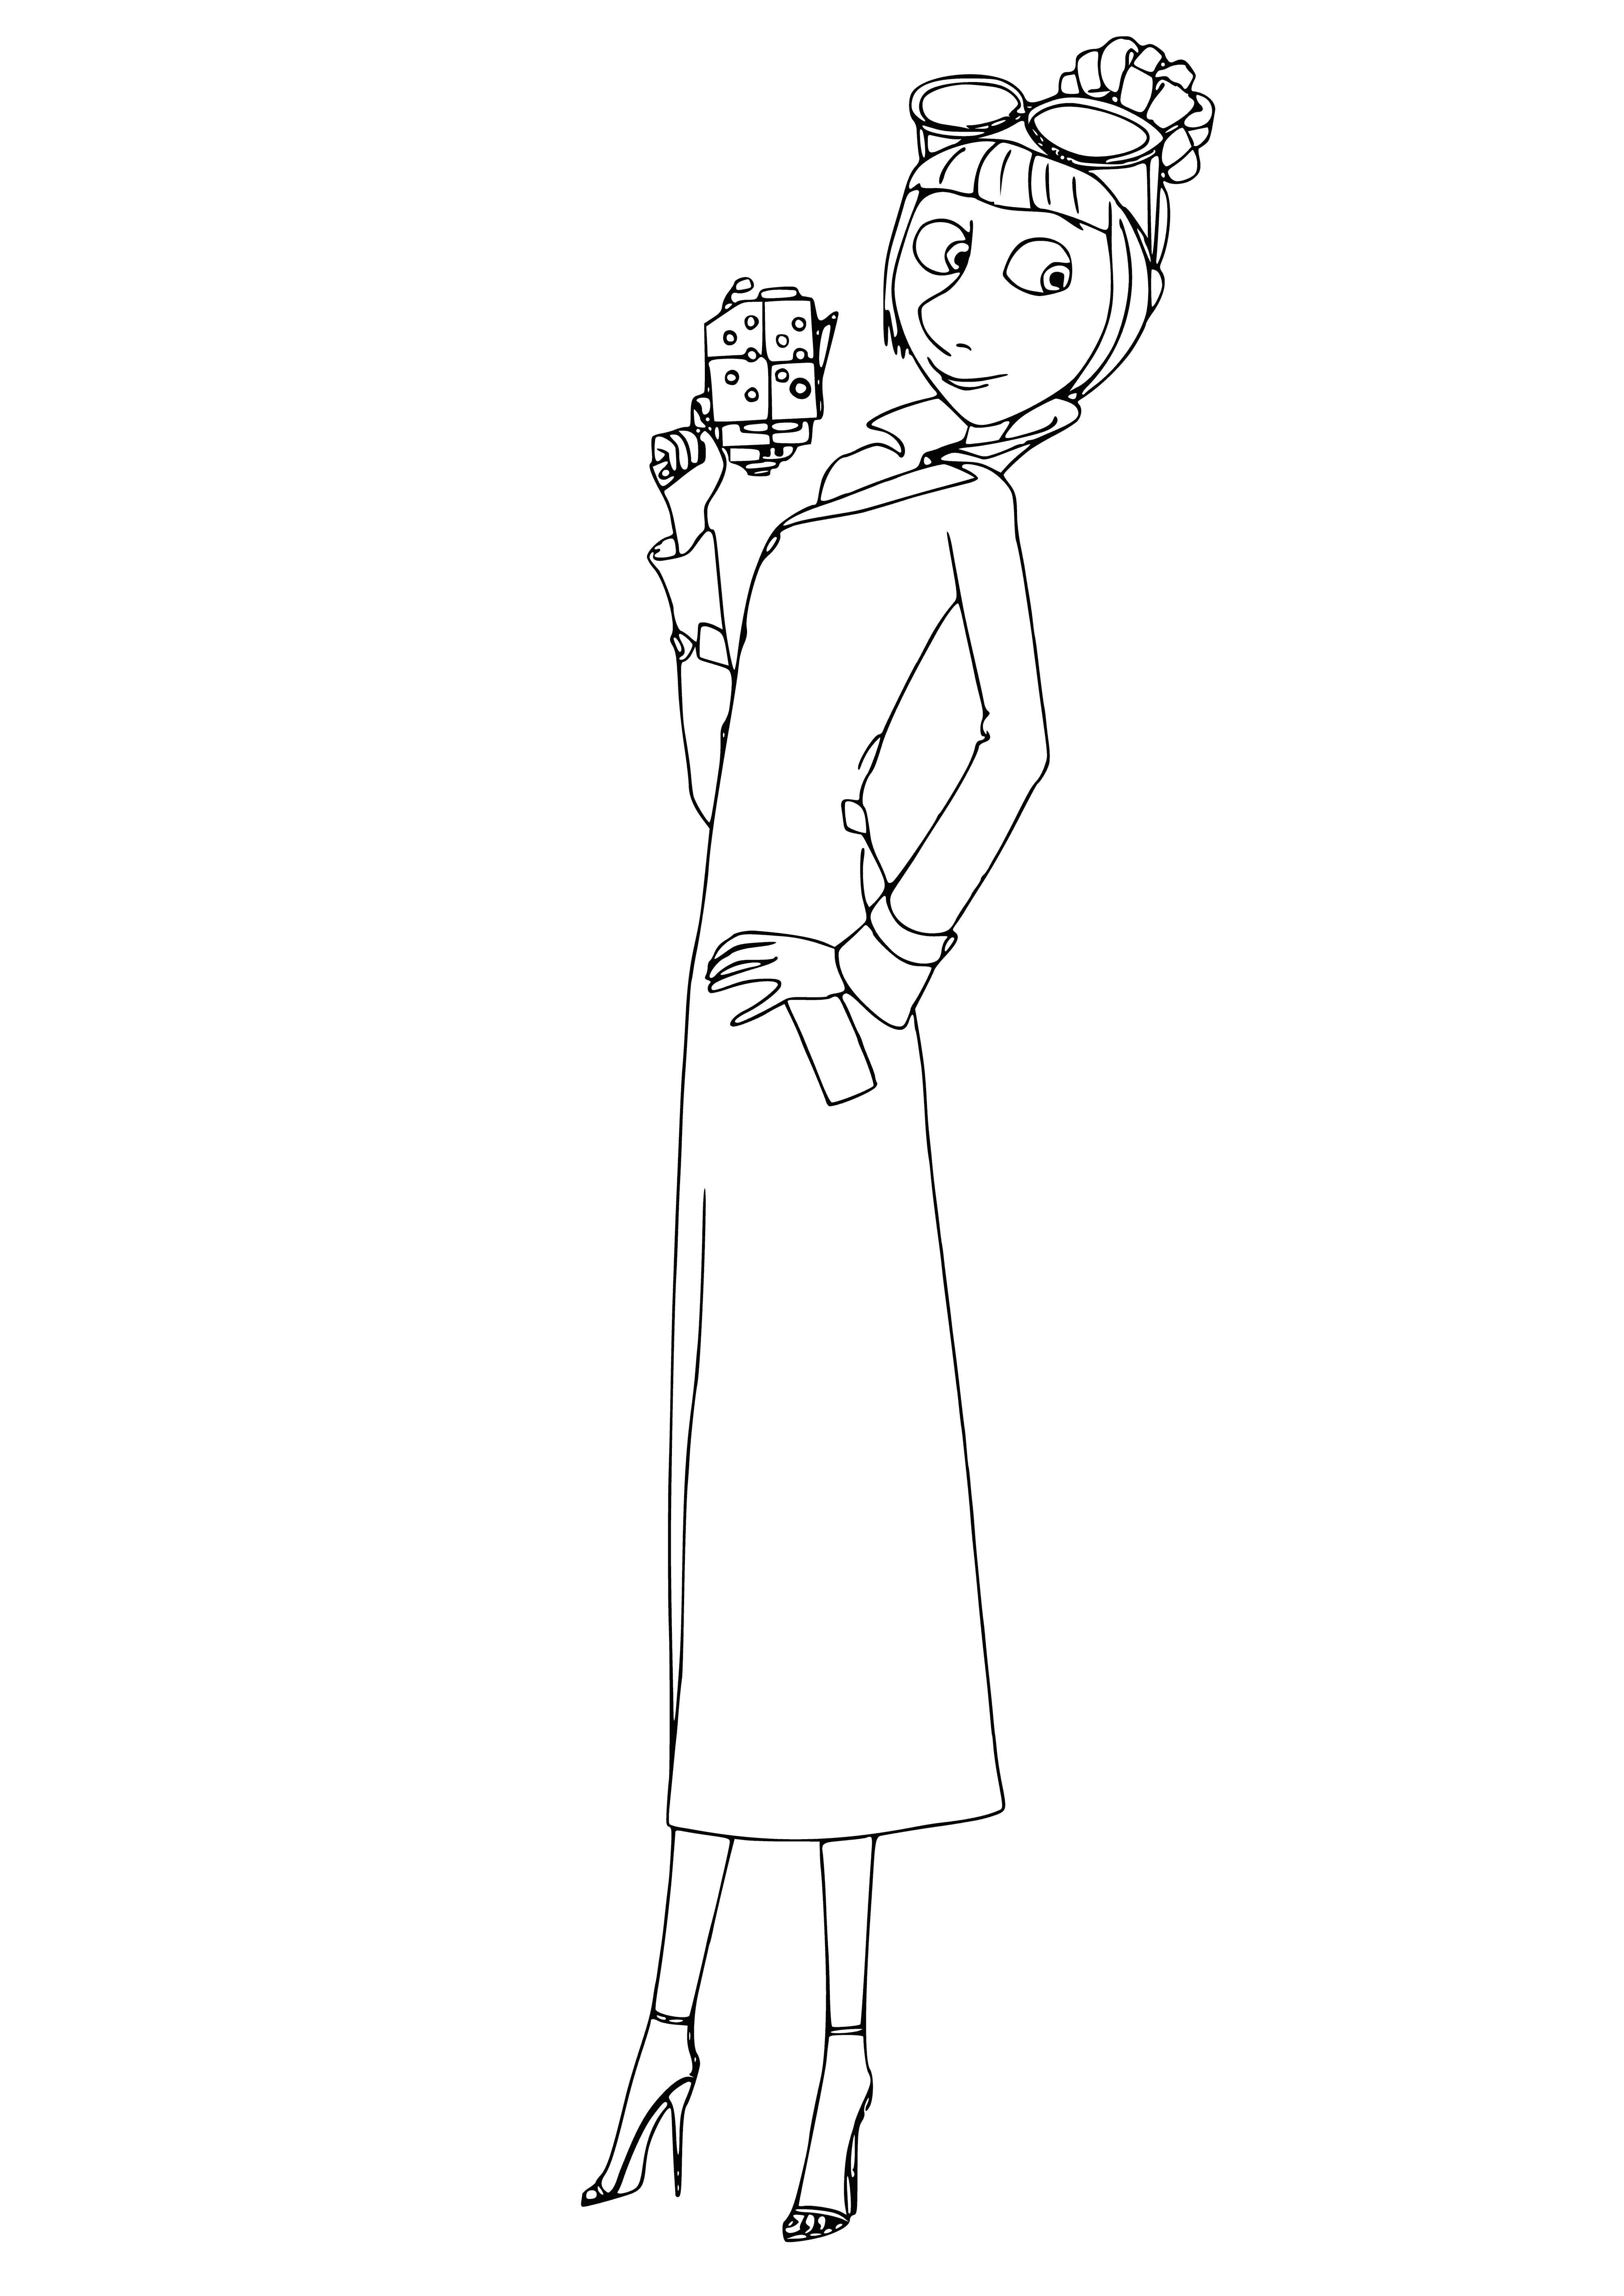 coloring page: Lucy is a lady with blonde hair, blue eyes, wearing a purple dress with white spots & a white belt. She's holding a white lollipop. #girlpower